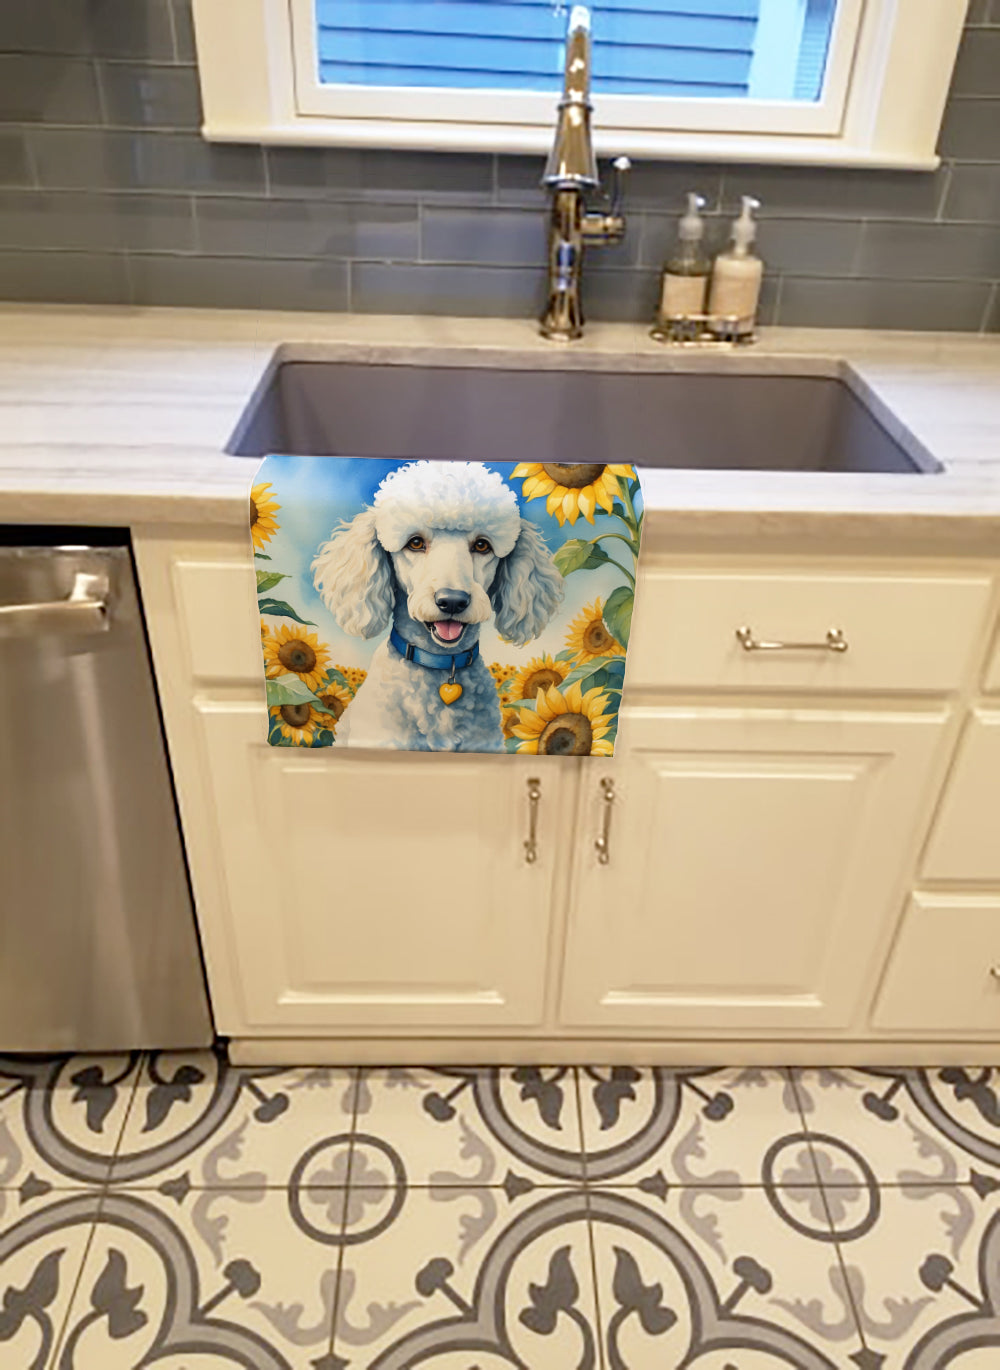 Buy this White Poodle in Sunflowers Kitchen Towel